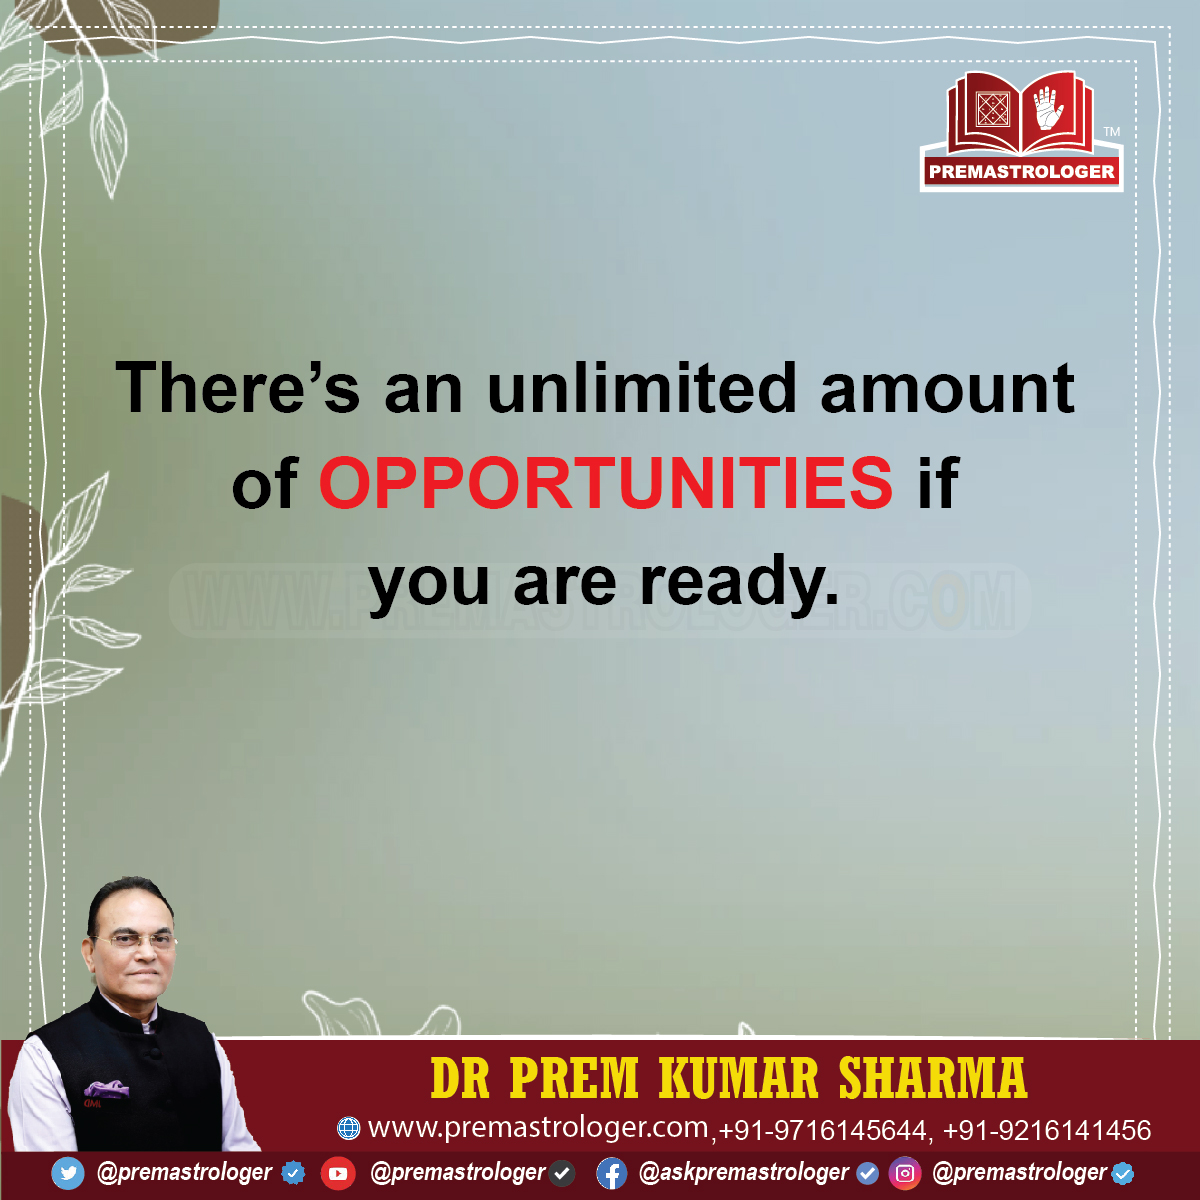 There’s an unlimited amount of OPPORTUNITIES if you are ready.

#GoodmorningTwitter
#सुप्रभात
#Fridaymorninglive
#FridayVibes
#Fridaymotivations
#Fridaymorning
#FridayThoughts